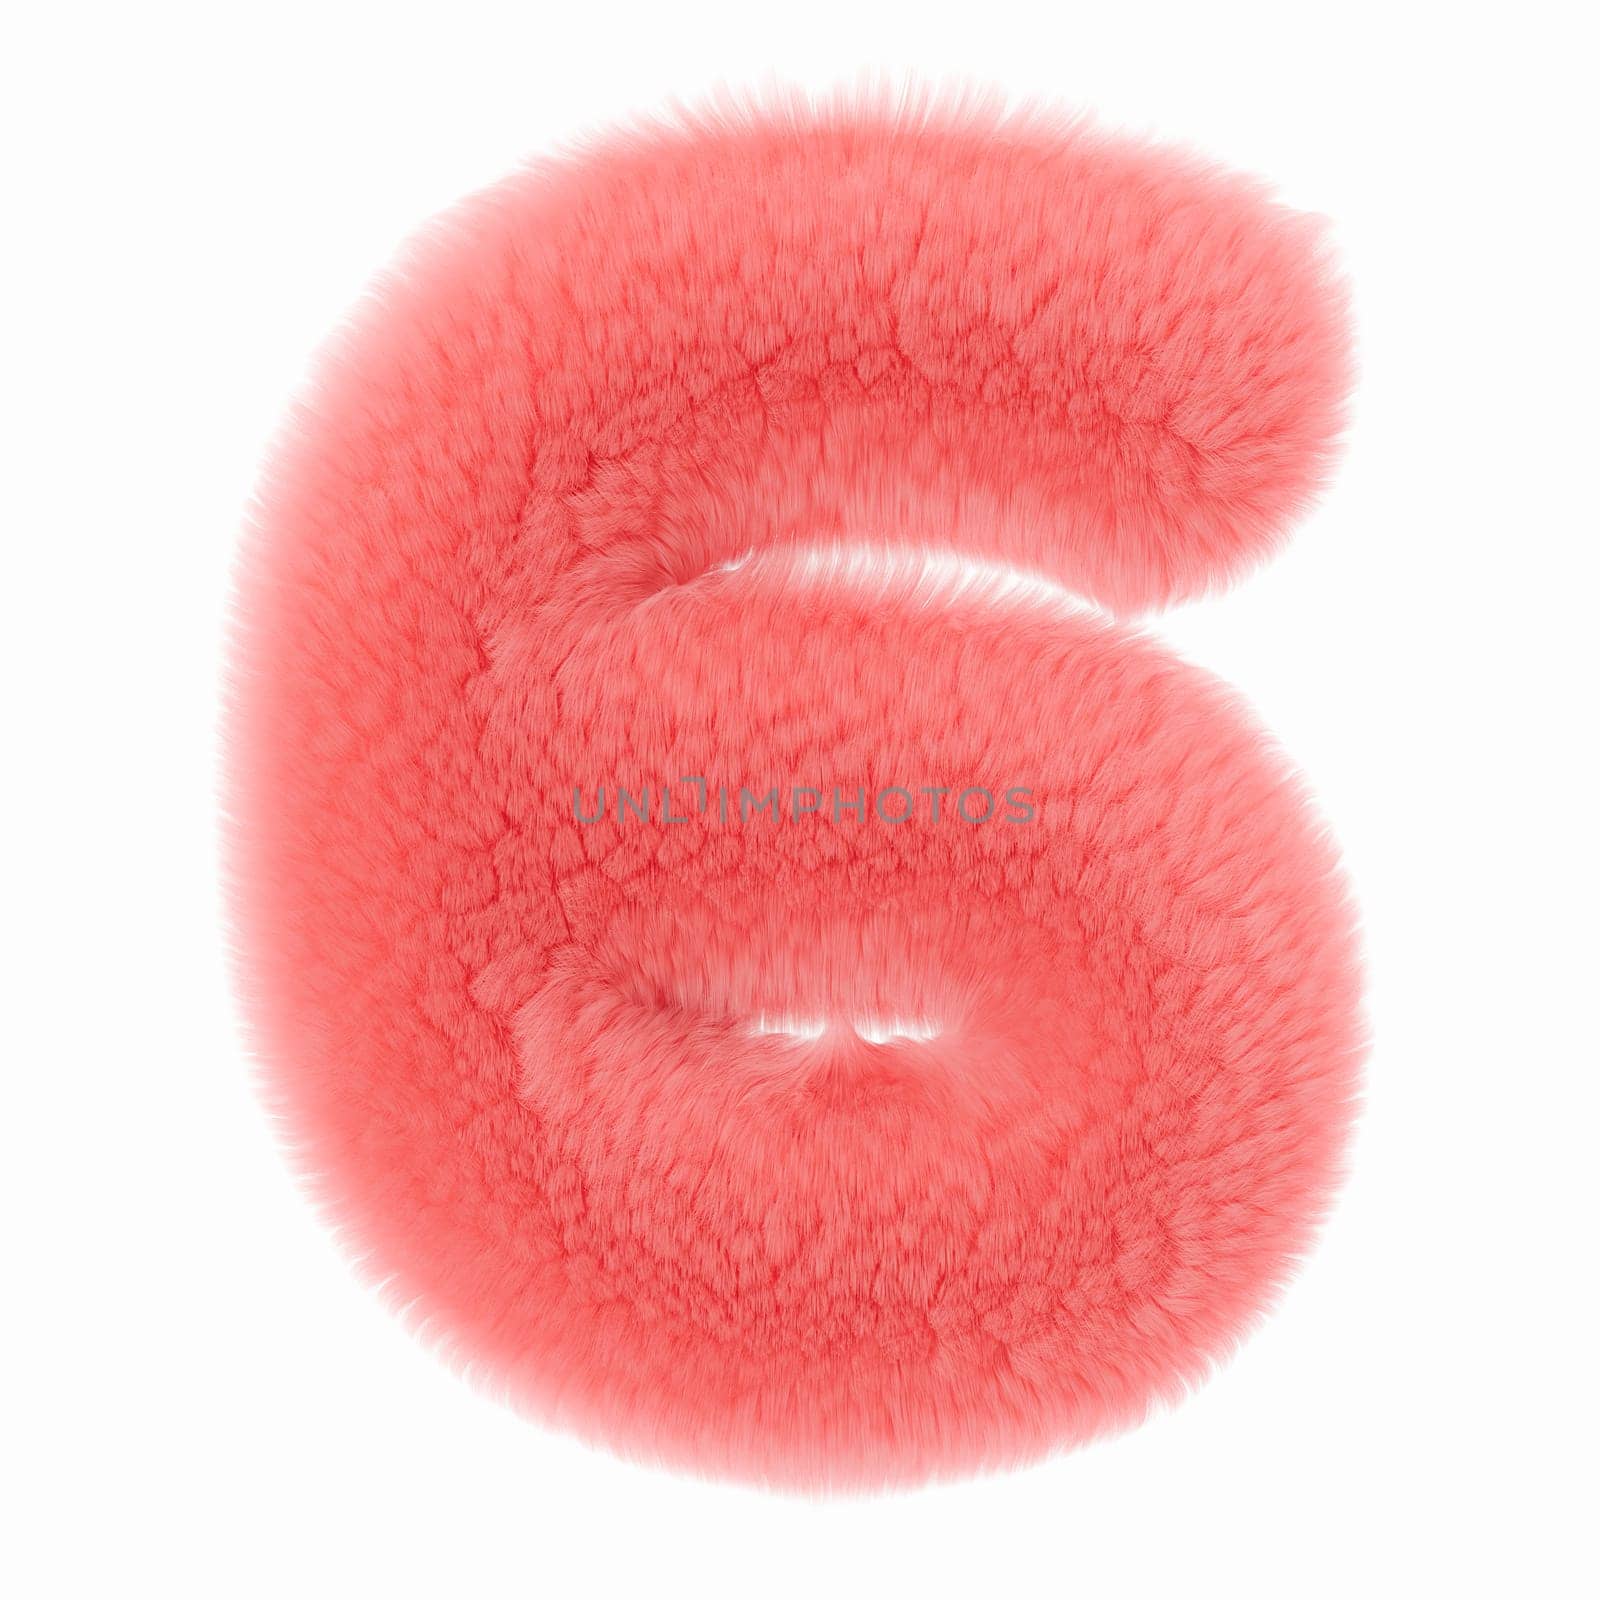 Pink and fluffy 3D number six, isolated on white background. Furry, soft and hairy symbol 6. Trendy, cute design element. Cut out object. 3D rendering. by creativebird